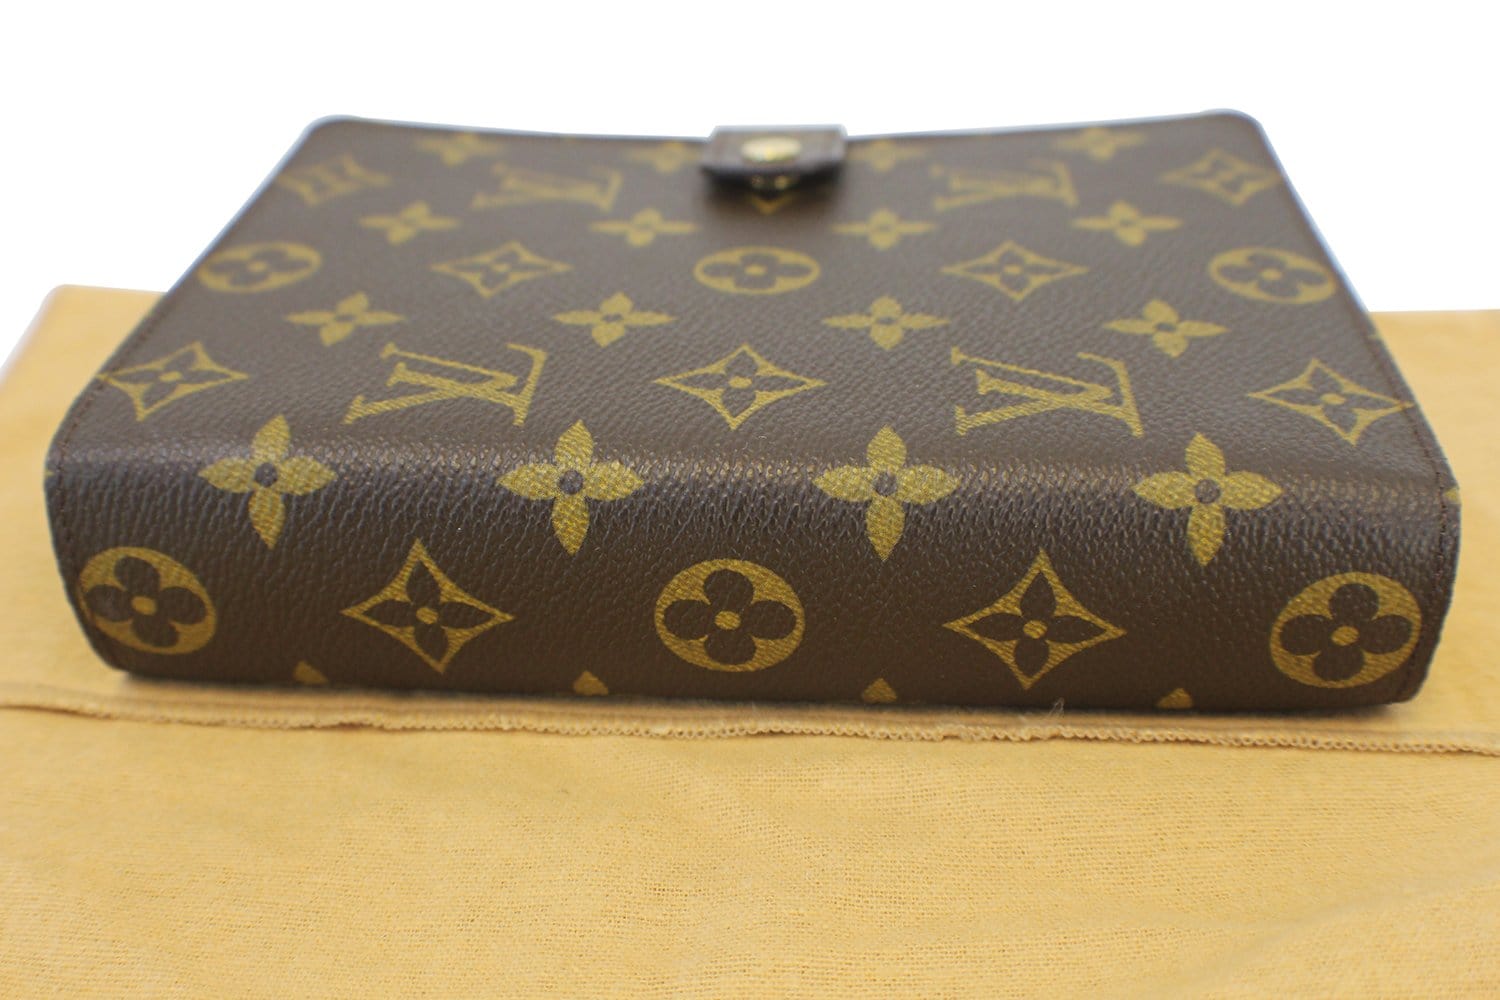 Auth LOUIS VUITTON Monogram Agenda MM R20004 Day Planner Cover Leather  102814